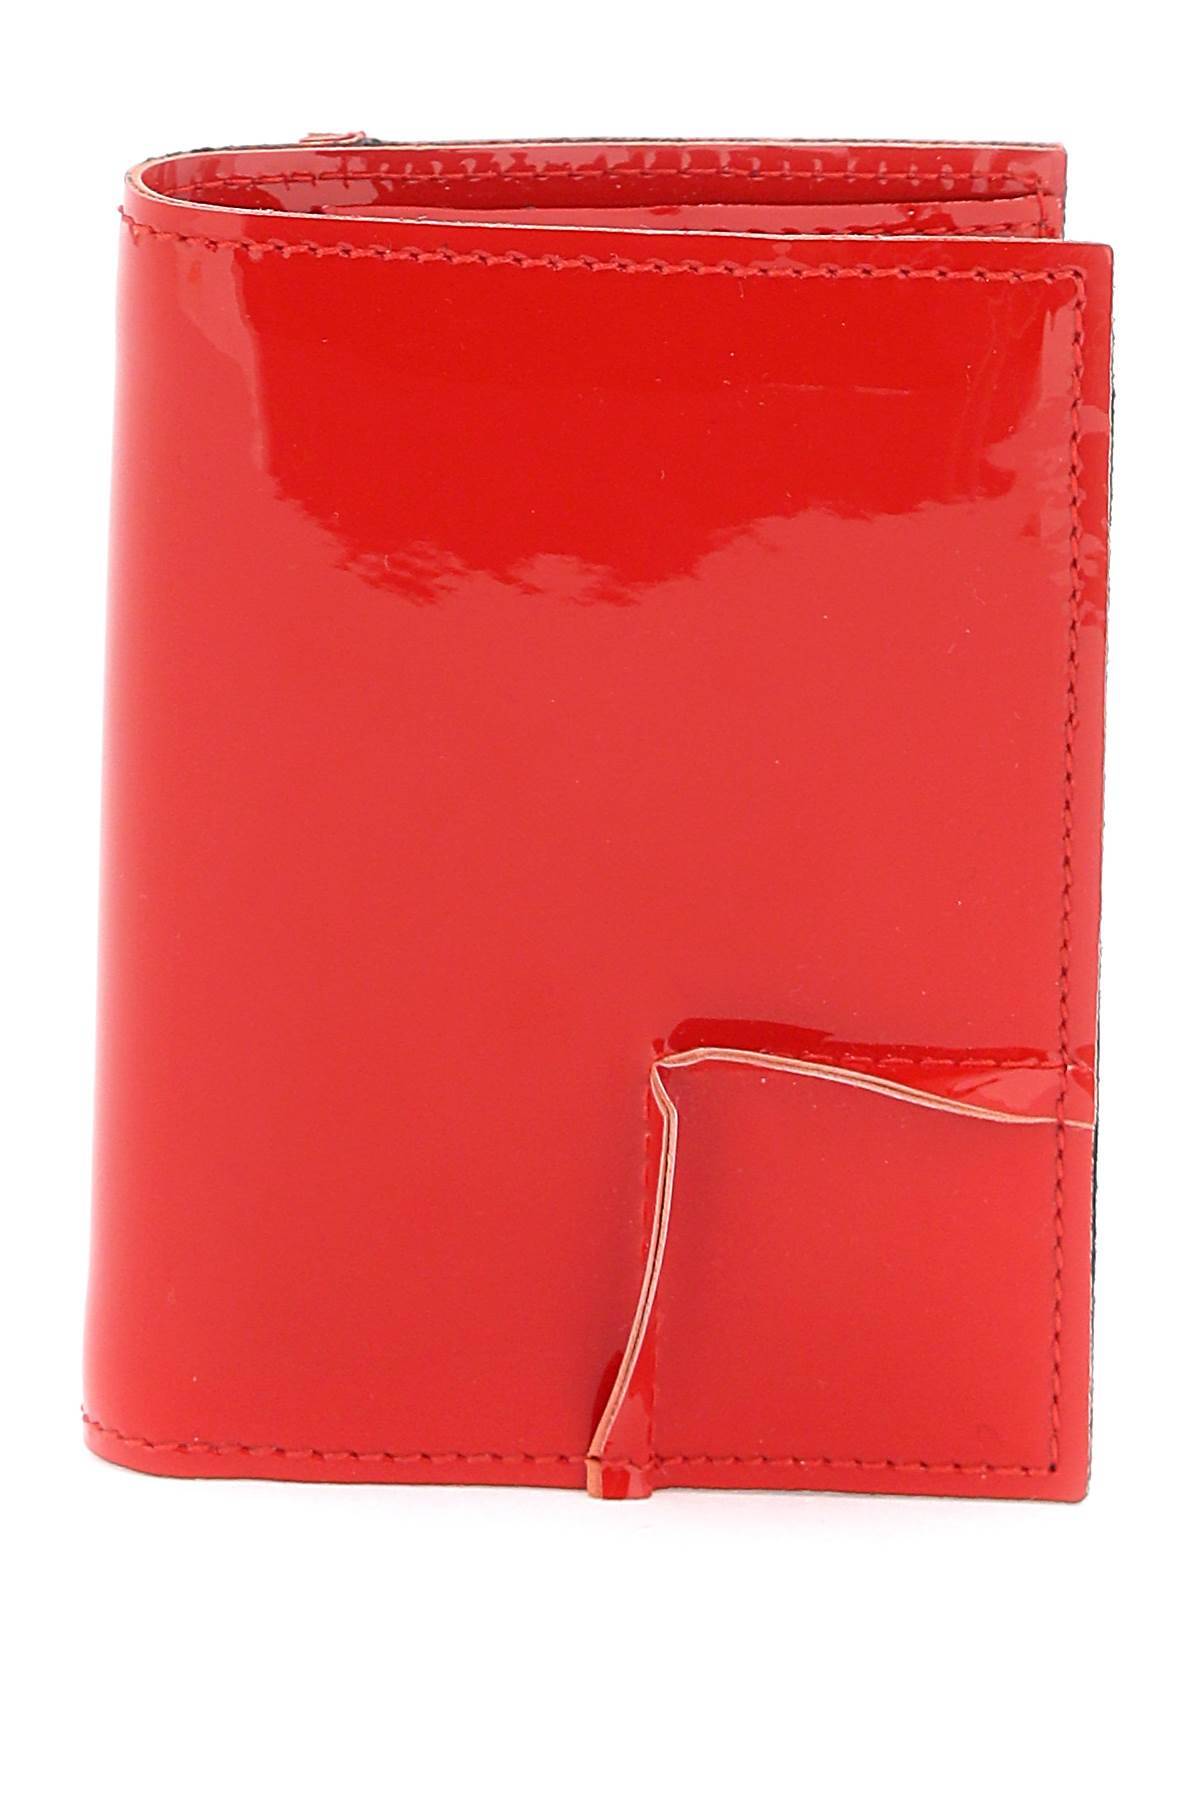 COMME DES GARCONS WALLET COMME DES GARCONS WALLET bifold patent leather wallet in